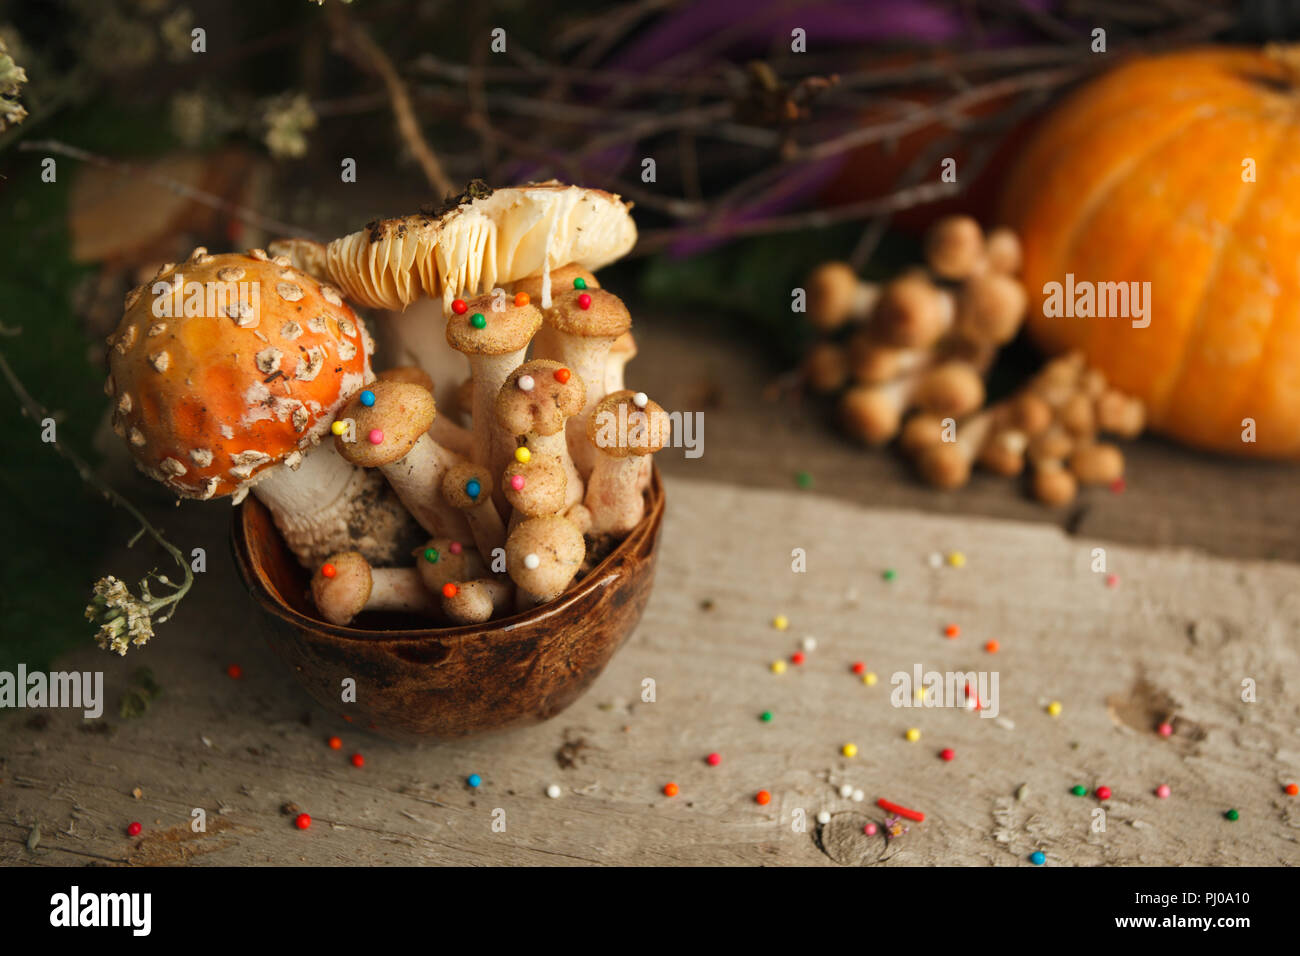 Magic fairytale party table decor, mushroom with confectionary in cup on wooden background, poison toxic food, halloween holiday Stock Photo